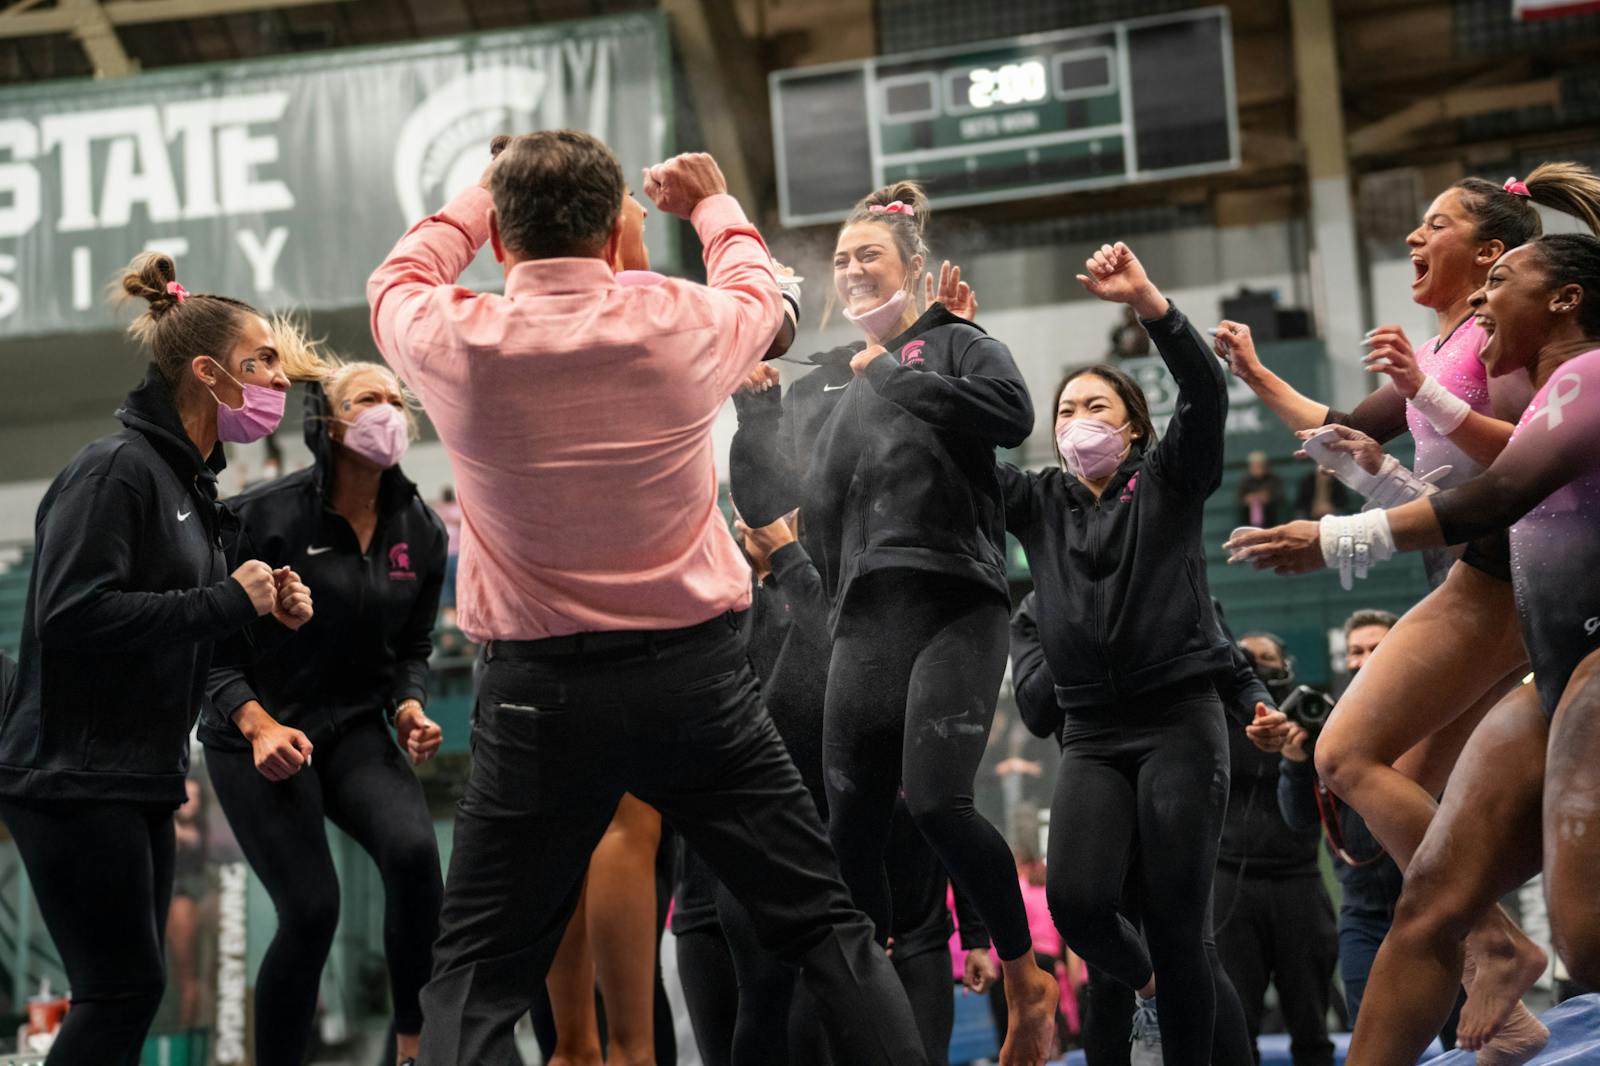 'I couldn't be more proud and more happy for them': An inside look at MSU gymnastics' groundbreaking NIL deal